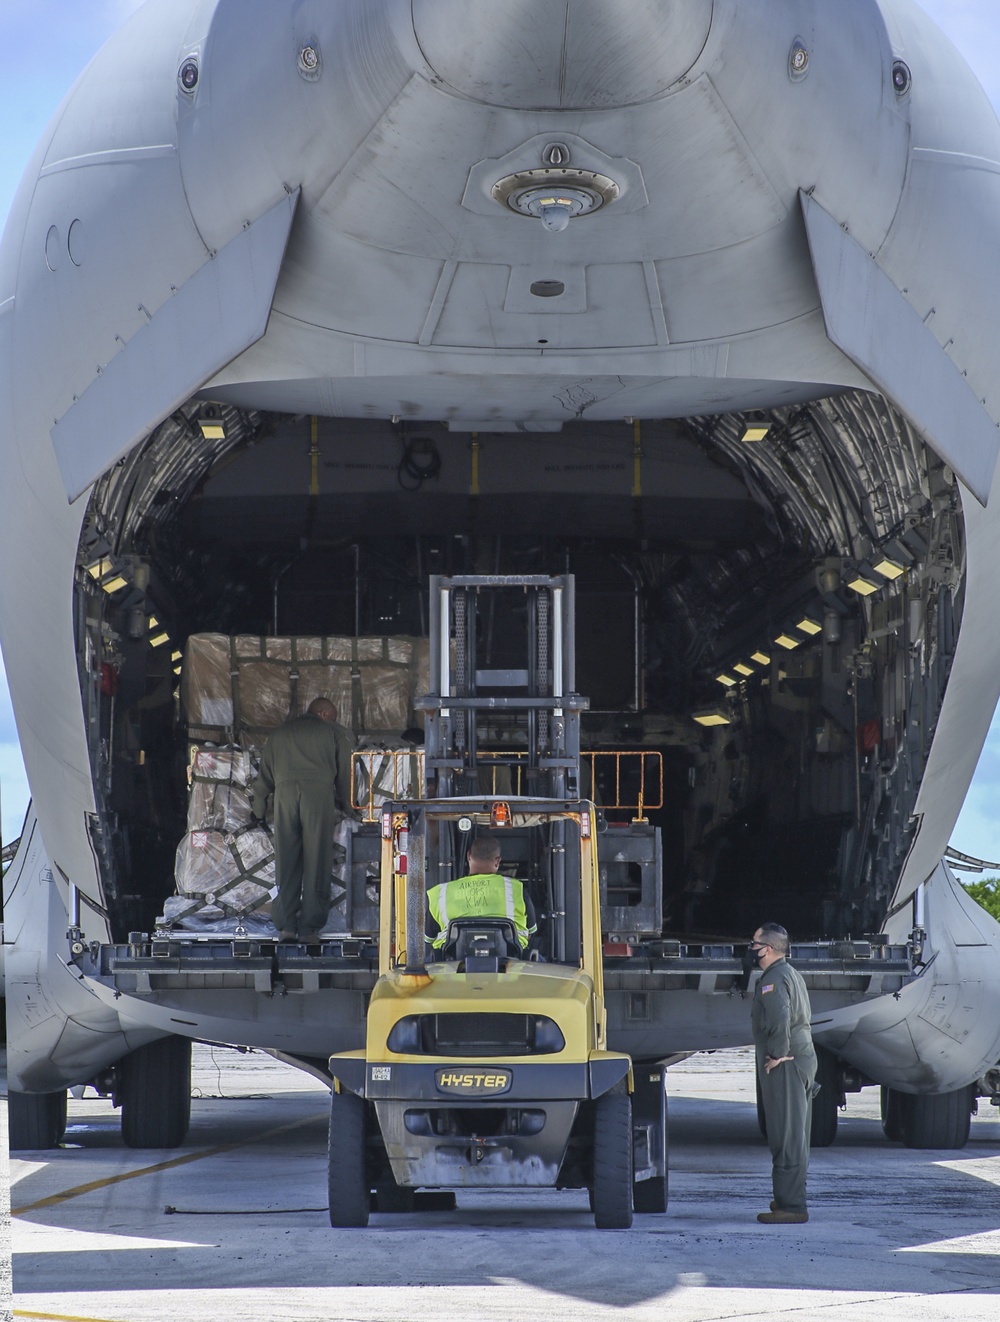 Crews Offload 18,000 Pounds of Mail At Bucholz Army Airfield